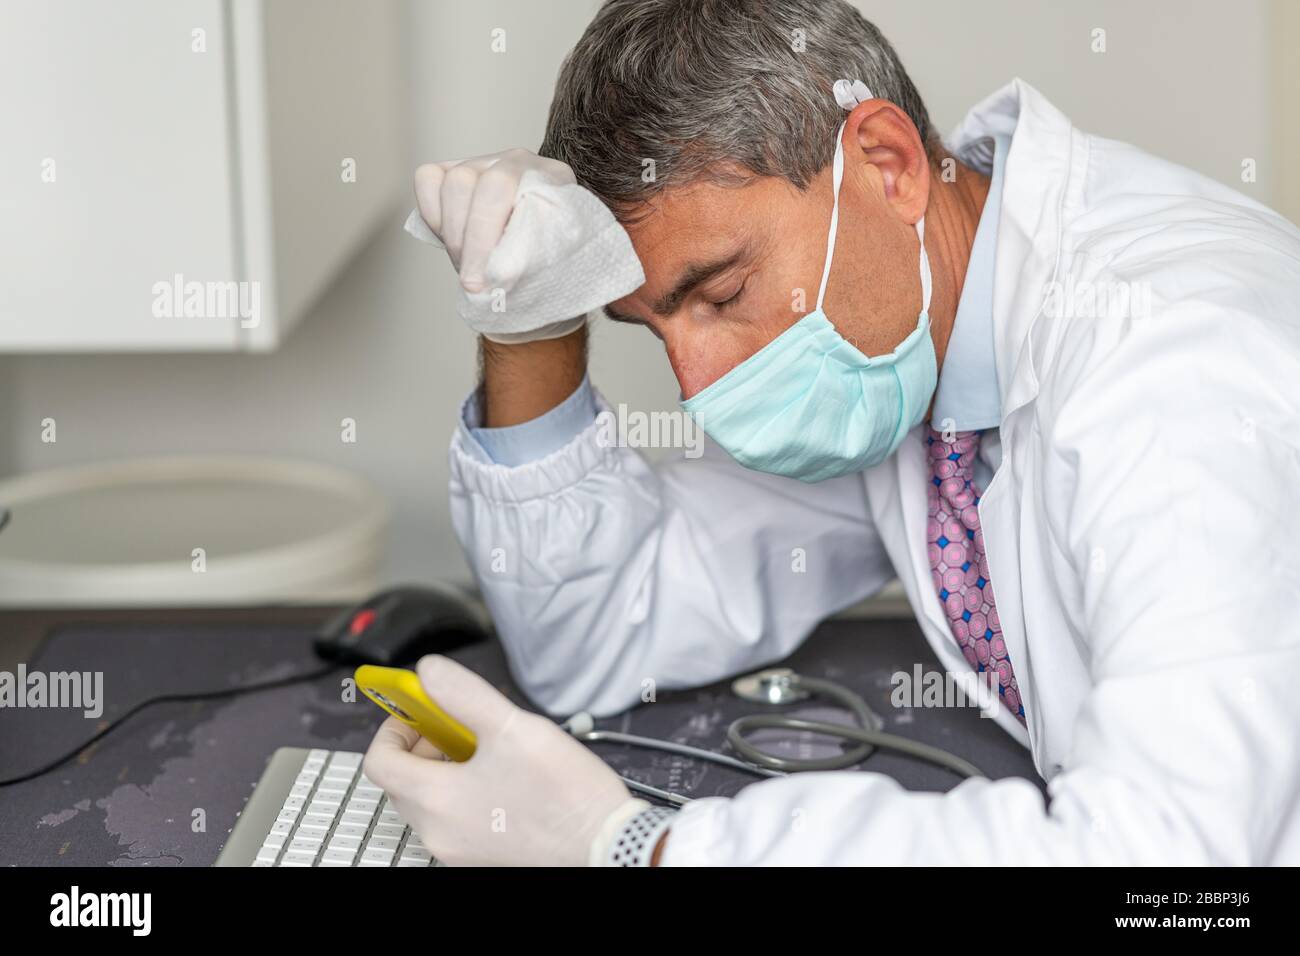 Tired doctor wearing mask and gloves at the hospital in coronavirus times, checking his smartphone. Stock Photo